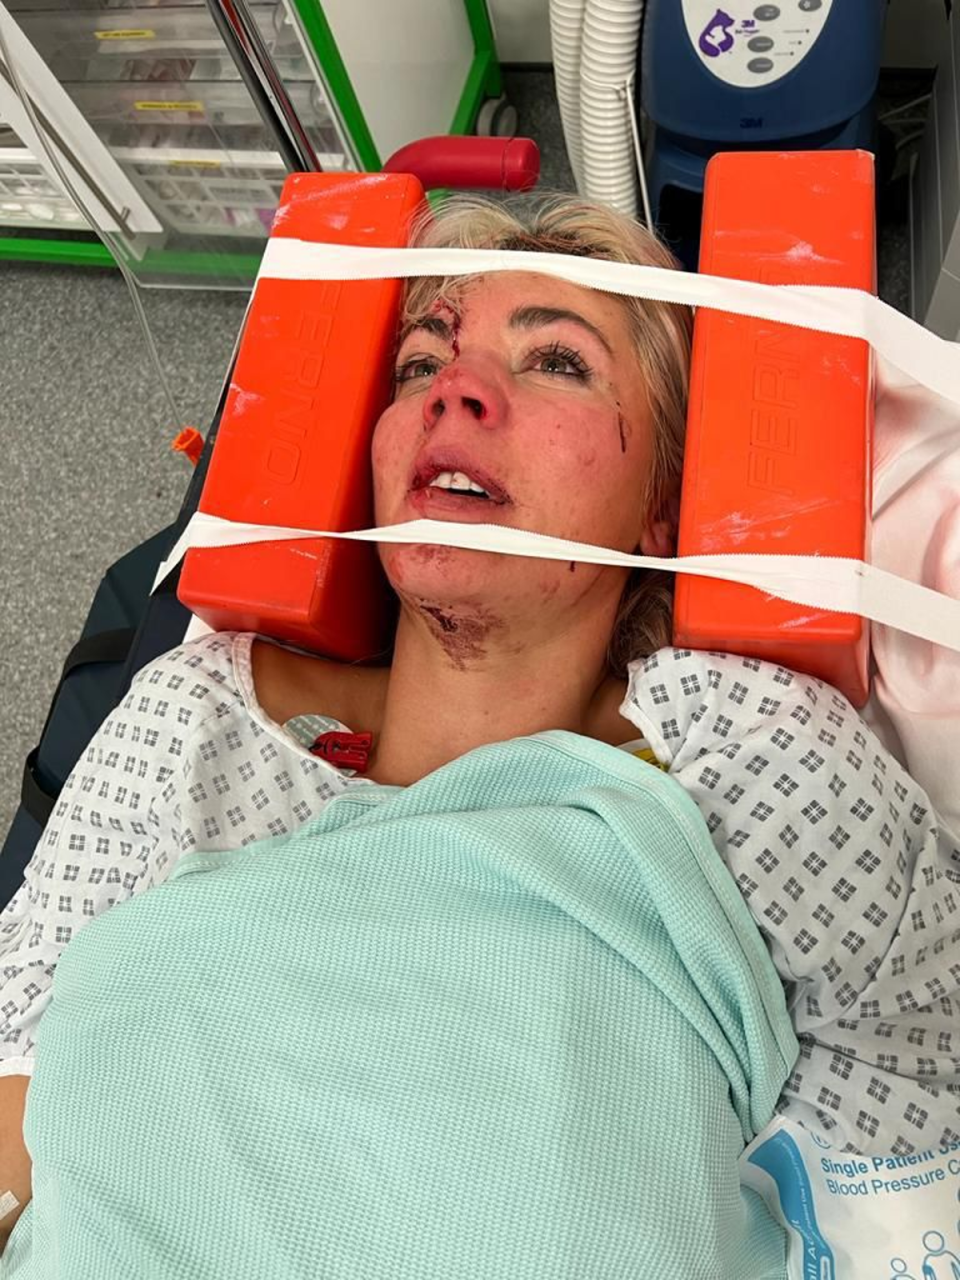 A Place in the Sun presenter Danni Menzies has been left with facial injuries after she was ‘taken out’ by a stolen moped (Danni Menzies)